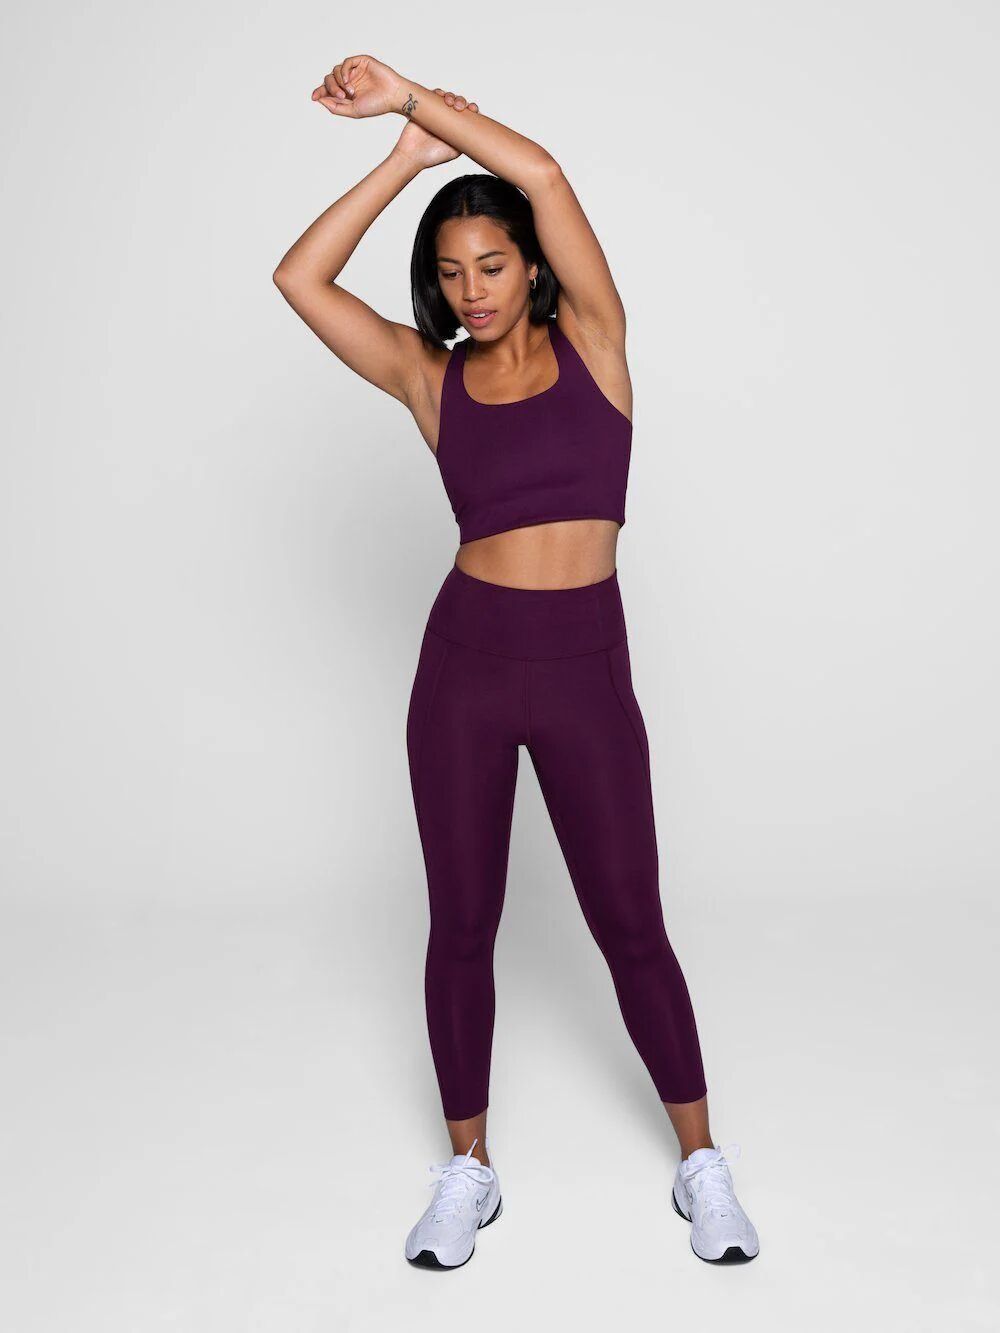 Girlfriend Collective Women's Compressive Legging - Made From Recycled Plastic Bottles, Plum / S / 7/8